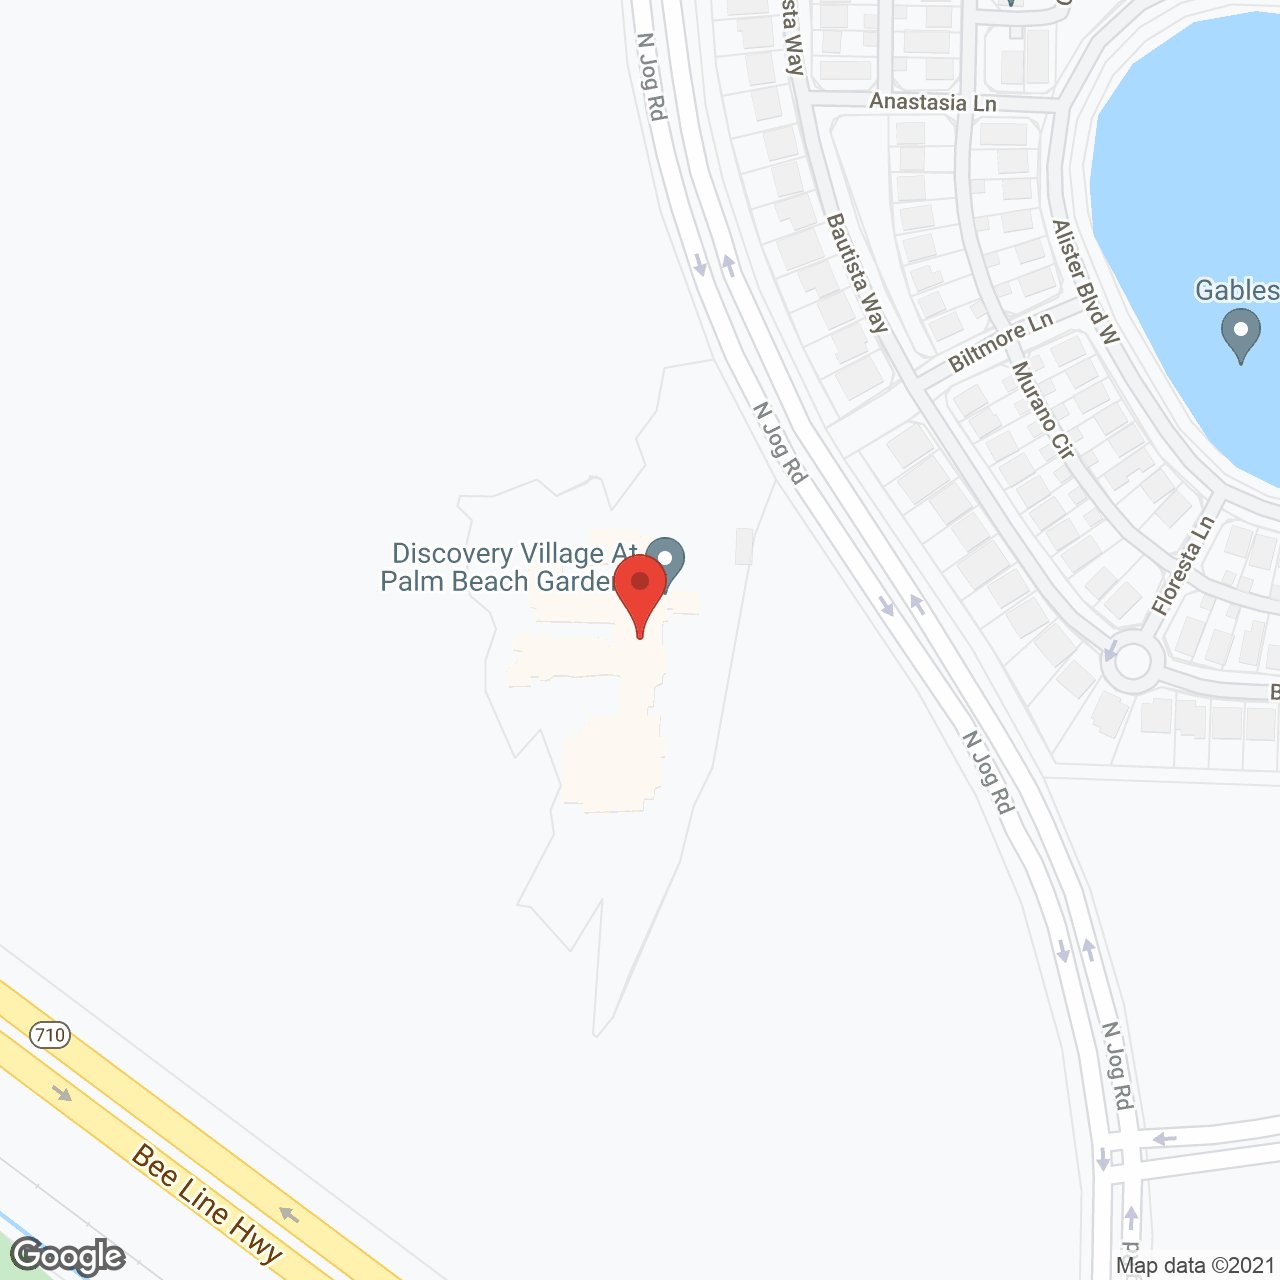 Discovery Village at Palm Beach Gardens in google map